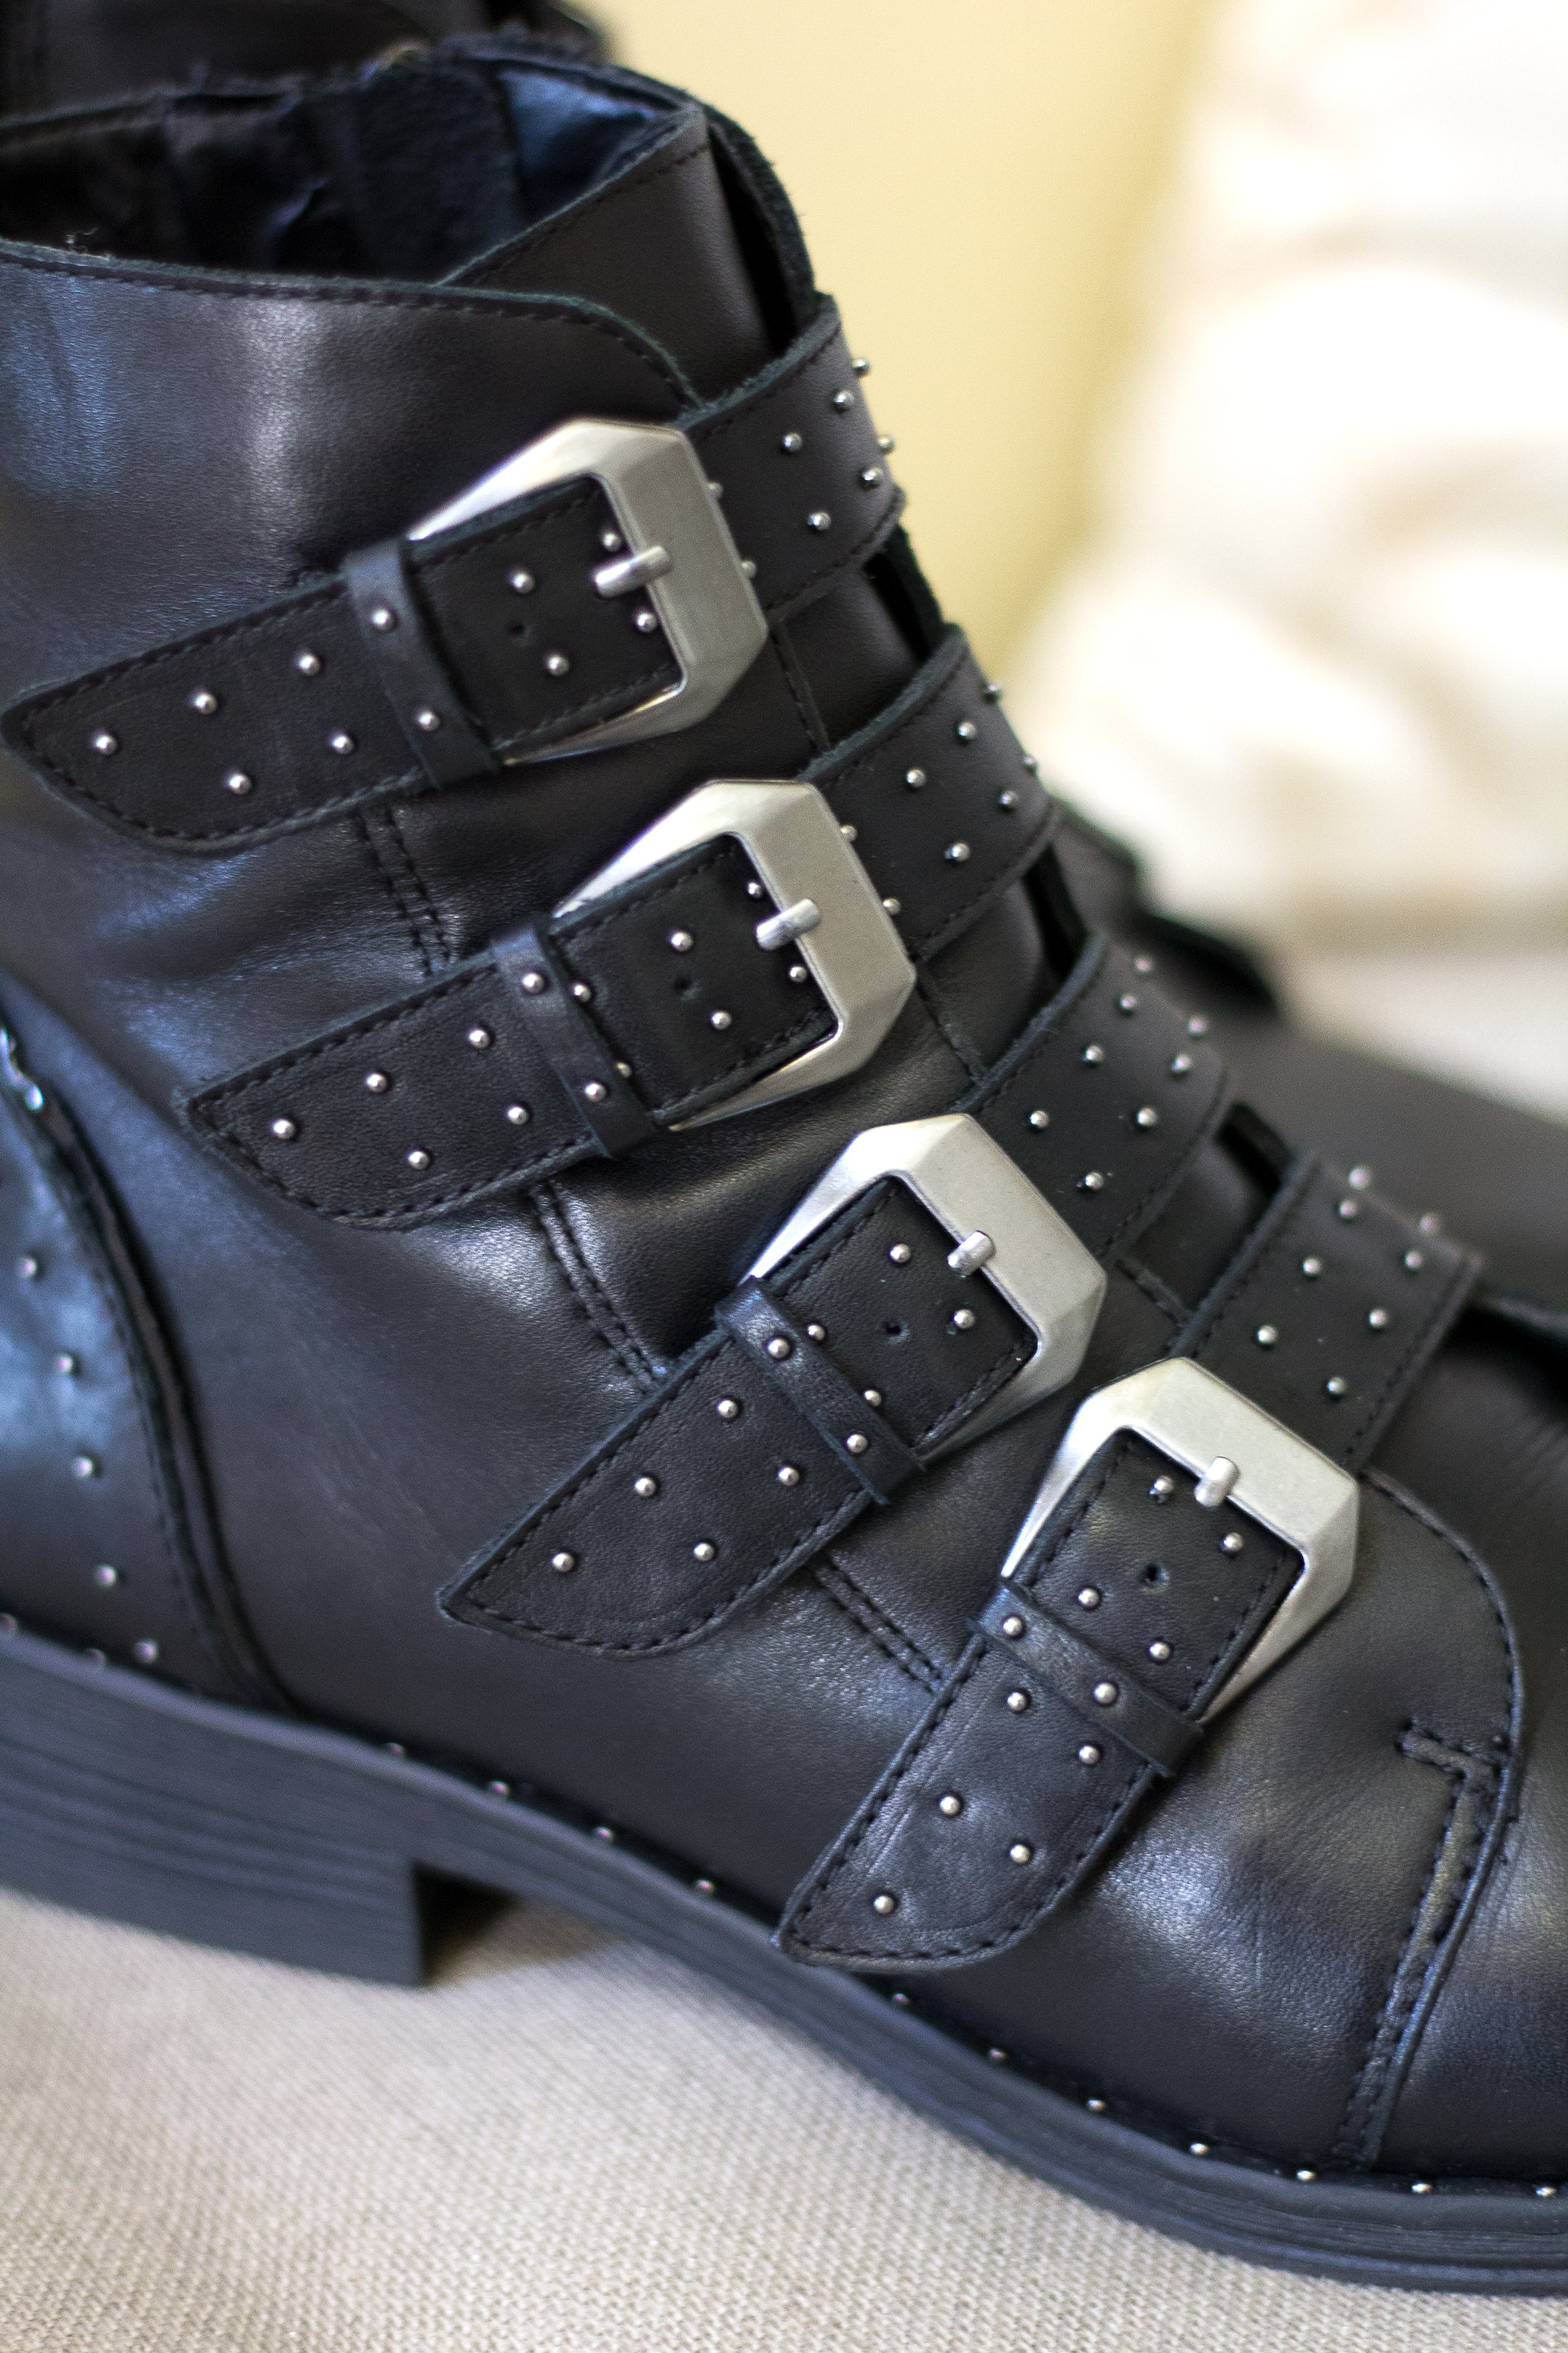 Look for Less: Givenchy Studded Boot Dupe